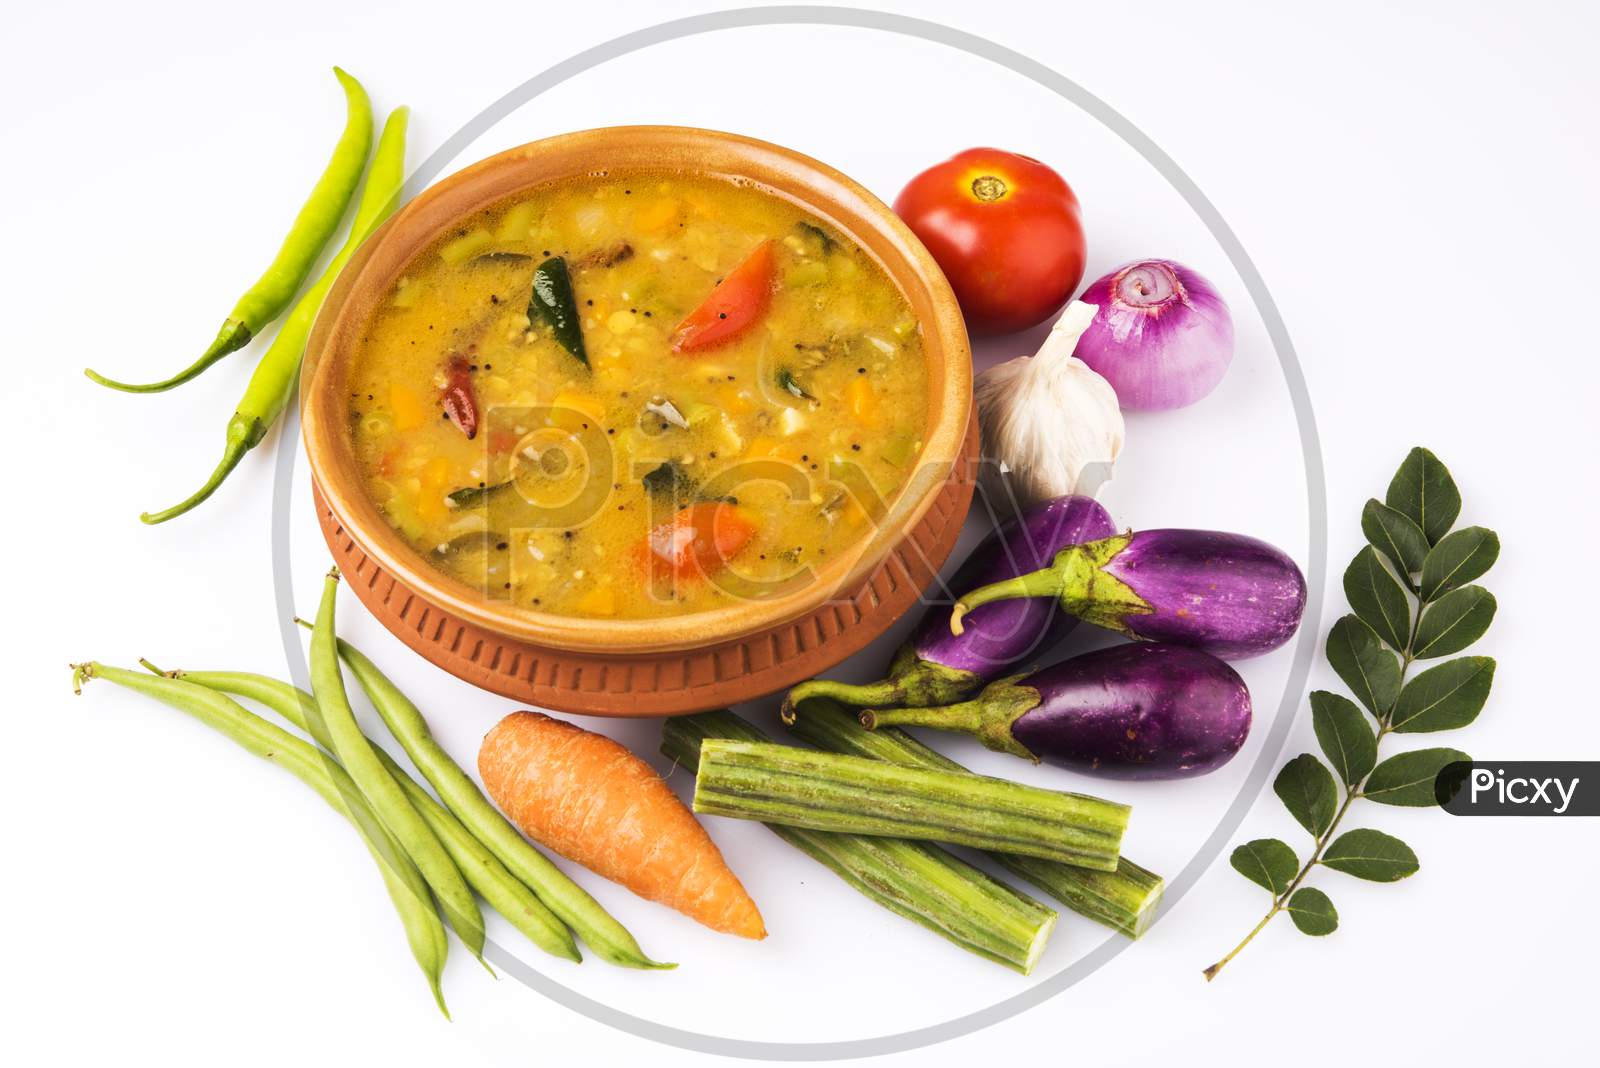 south indian vegetable sambar, in earthen bowl on white background